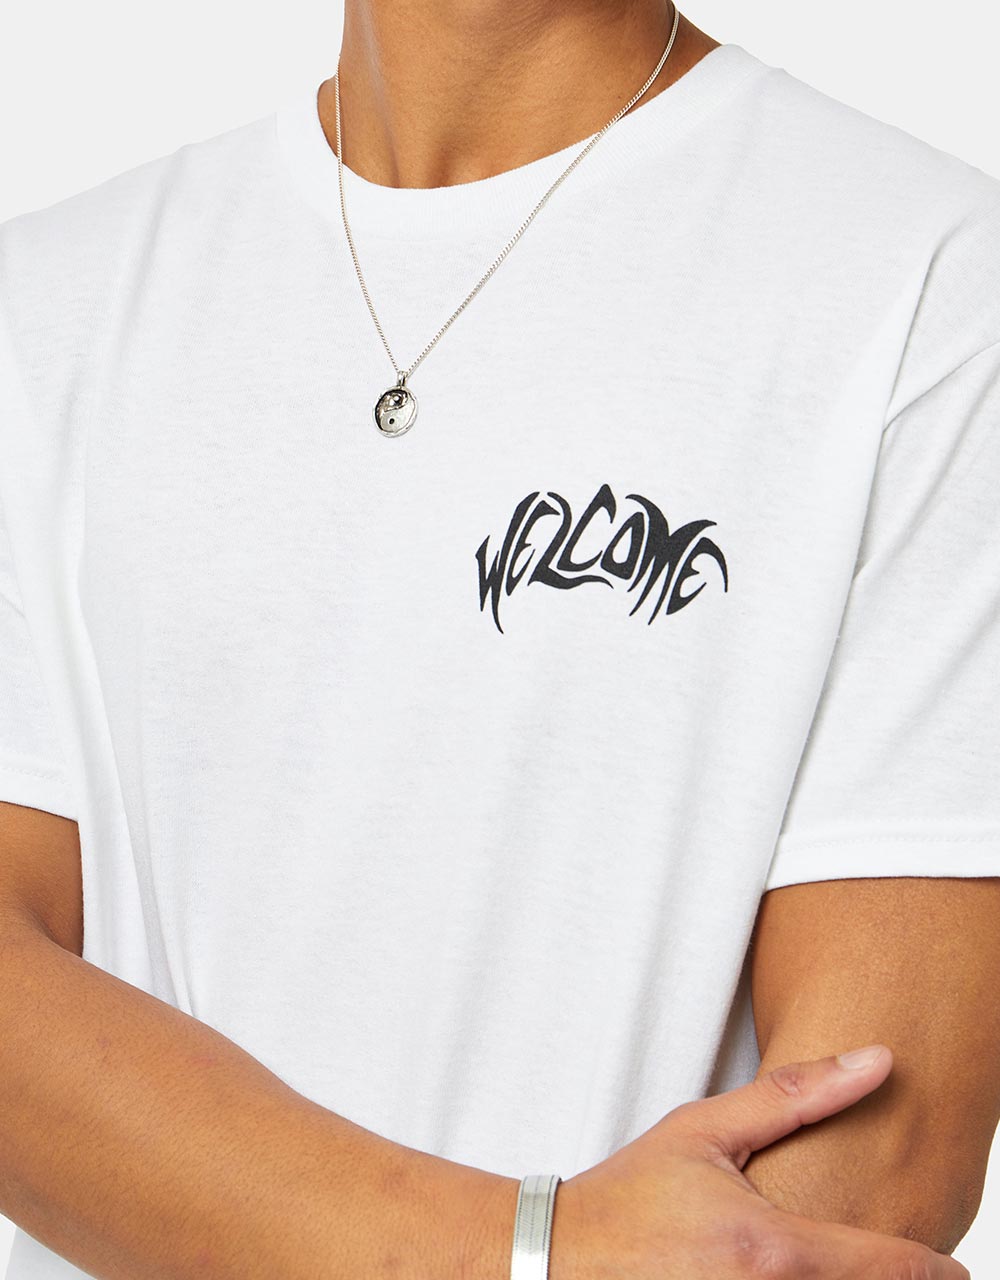 Welcome Thumper T-Shirt - White